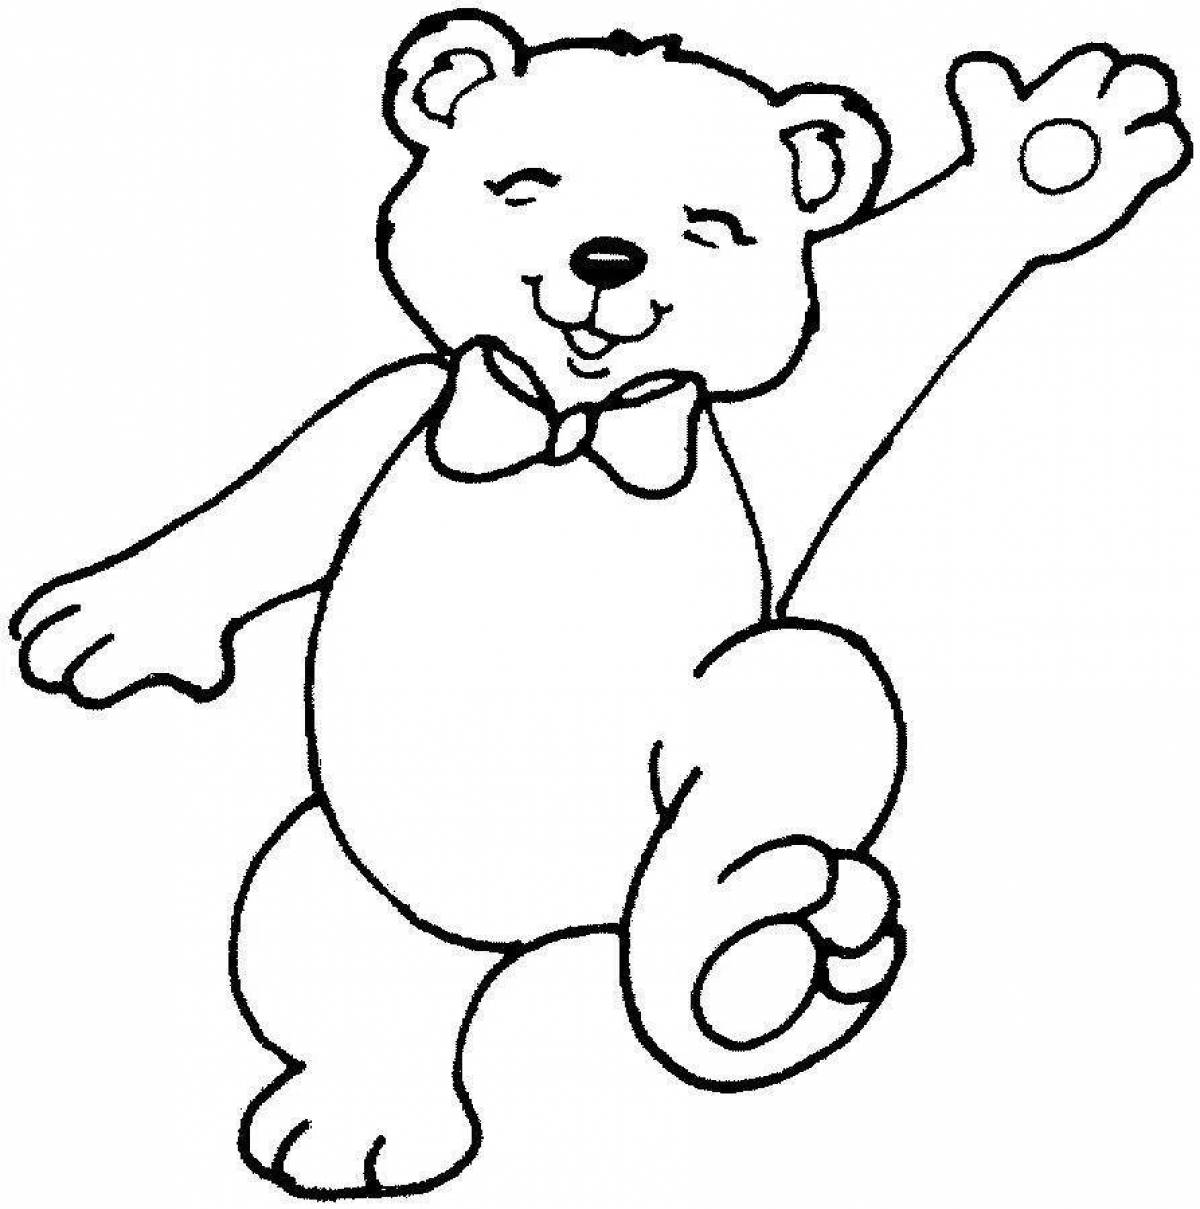 Coloring book busy teddy bear for kids